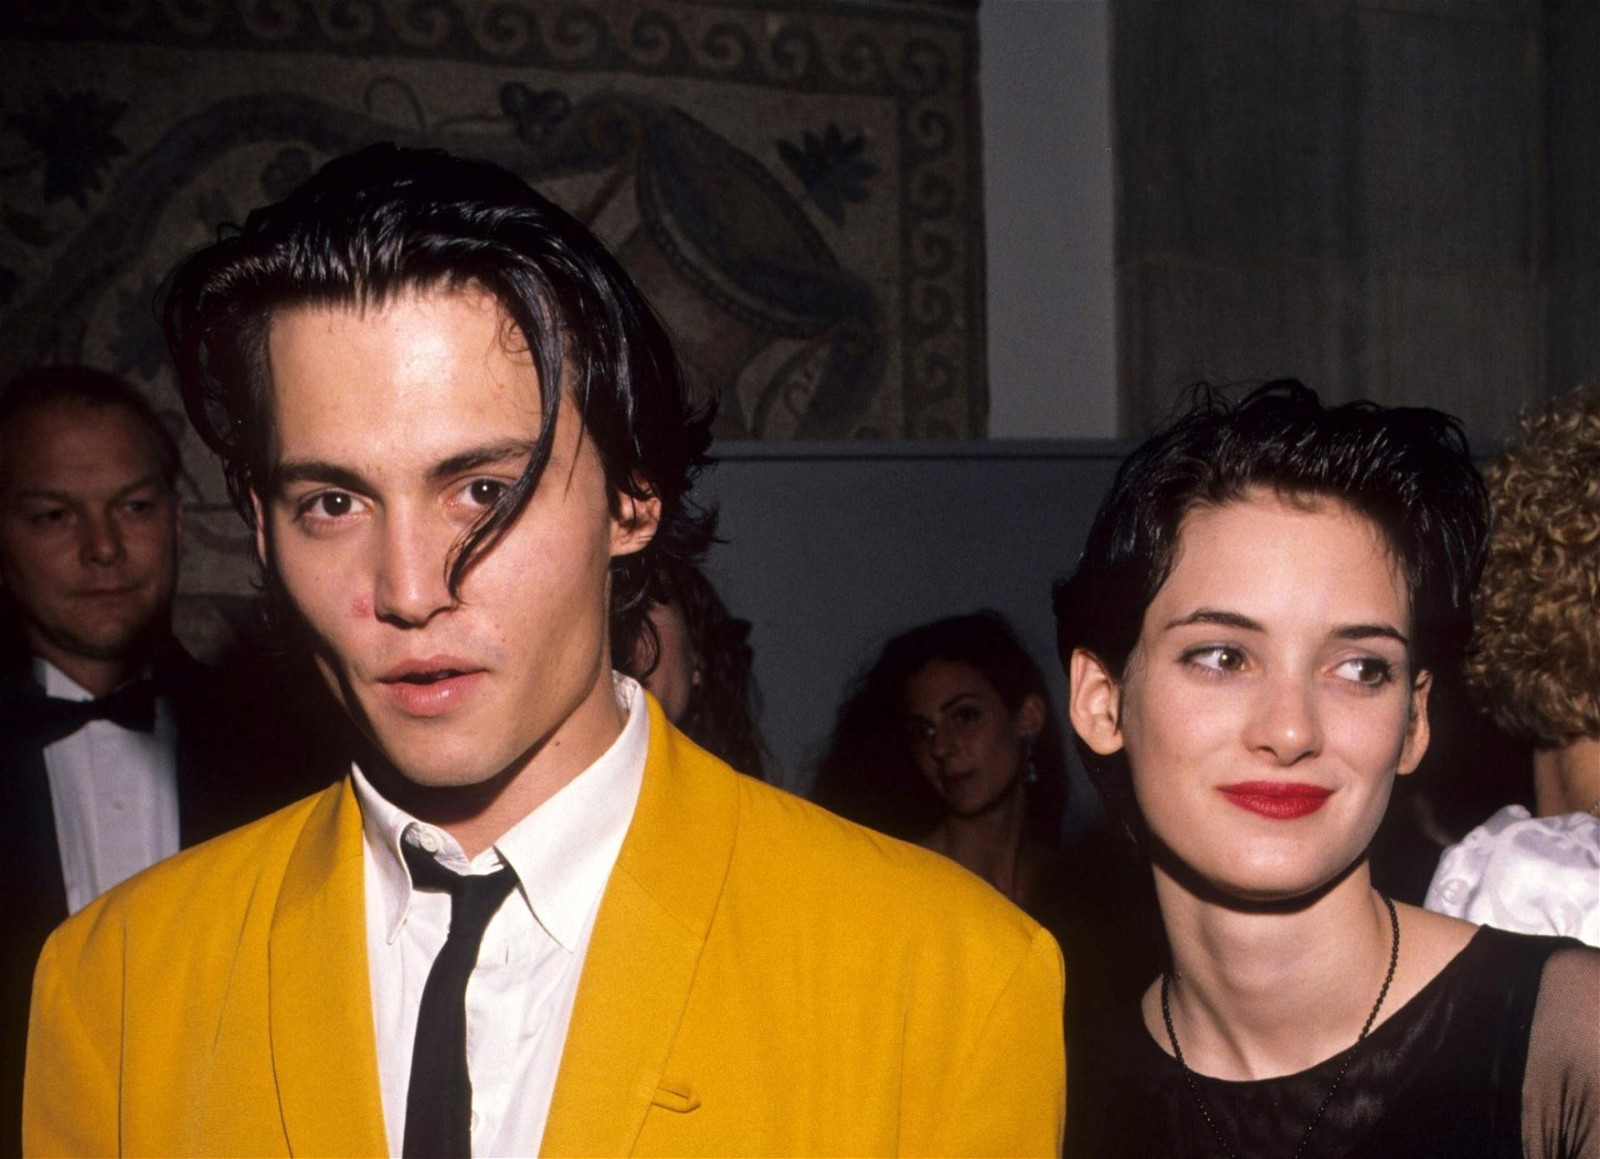 Johnny Depp & Winona Ryder in the early 90s